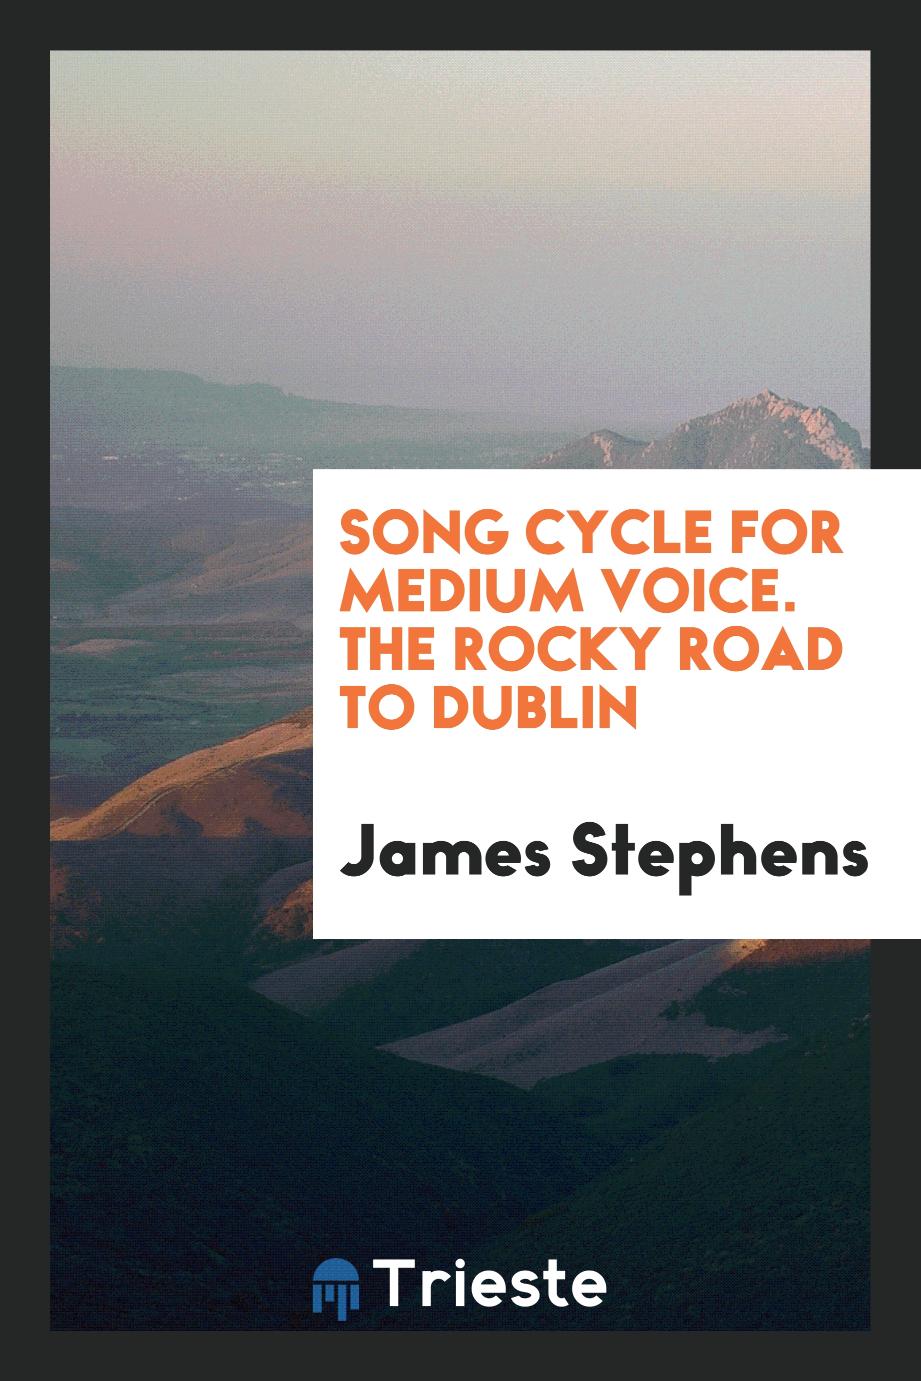 Song cycle for medium voice. The Rocky Road to Dublin